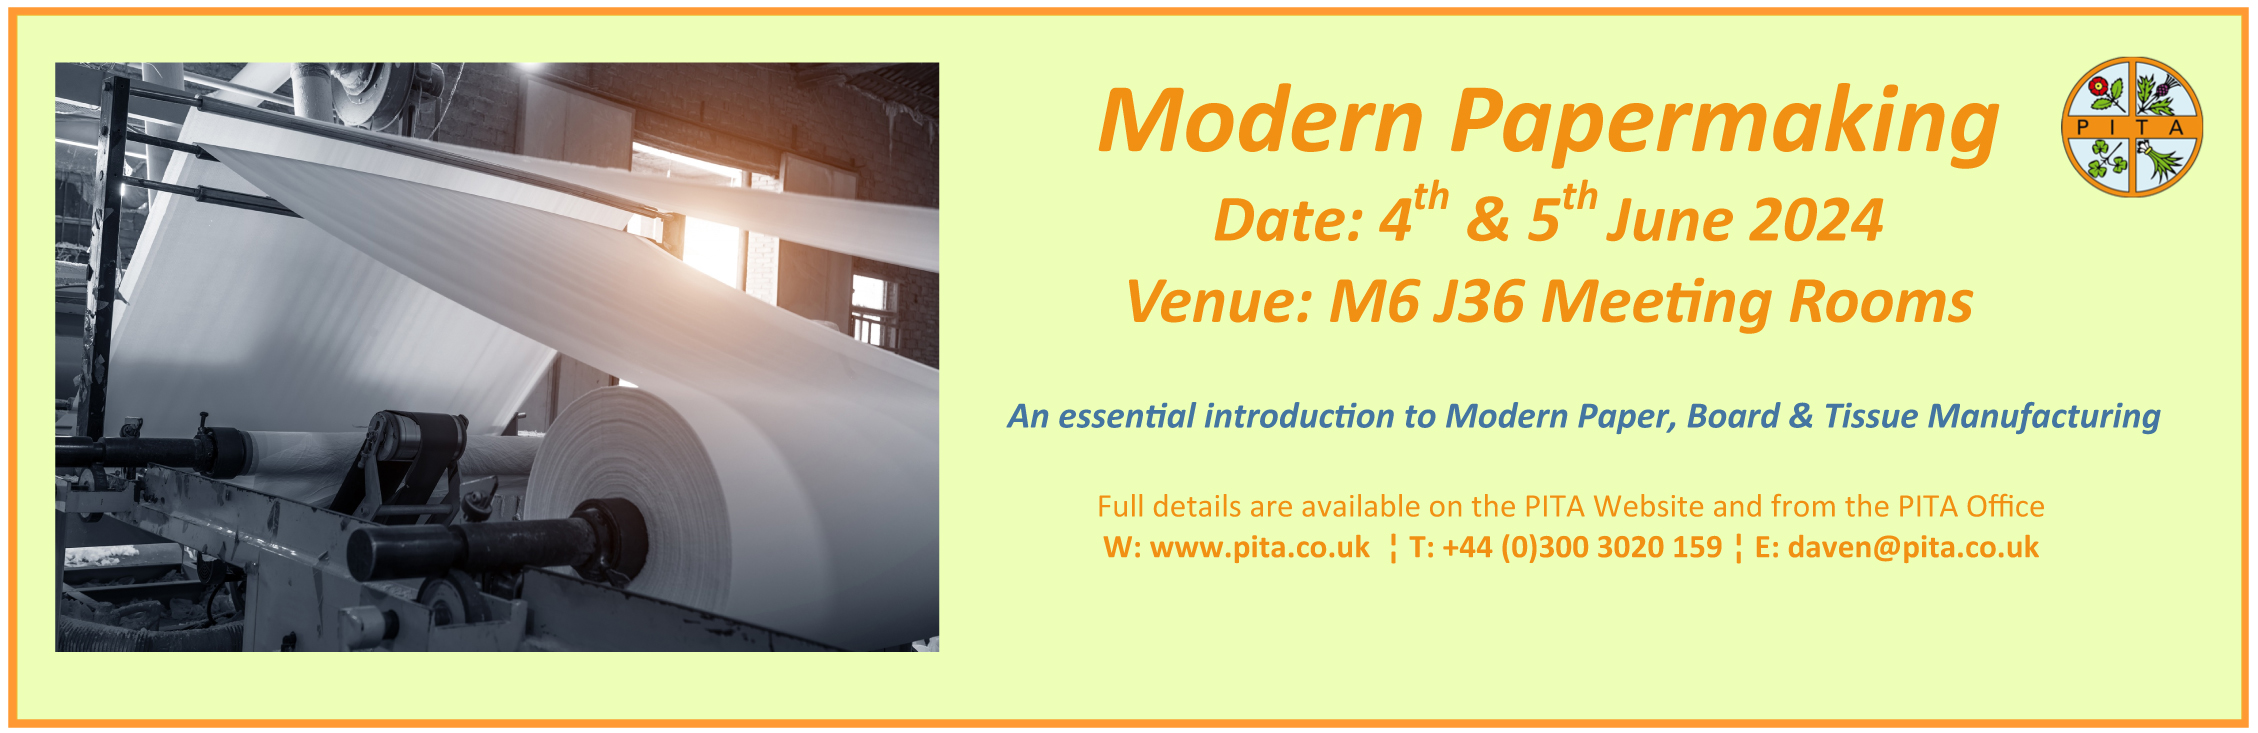 Modern Papermaking Course June 2024 with venue